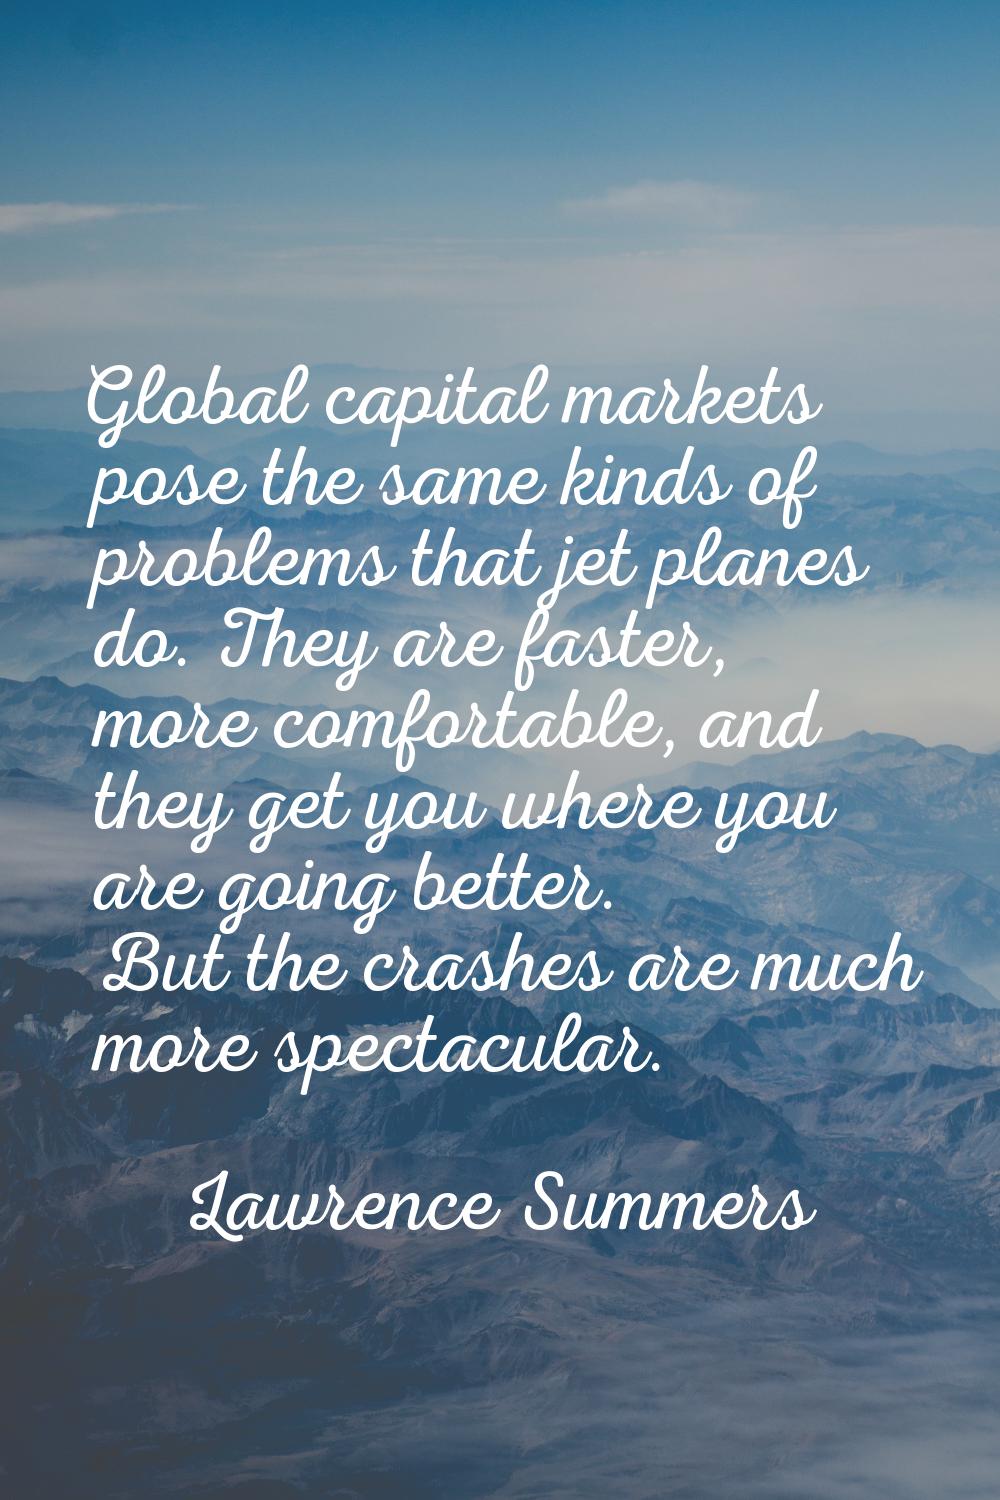 Global capital markets pose the same kinds of problems that jet planes do. They are faster, more co